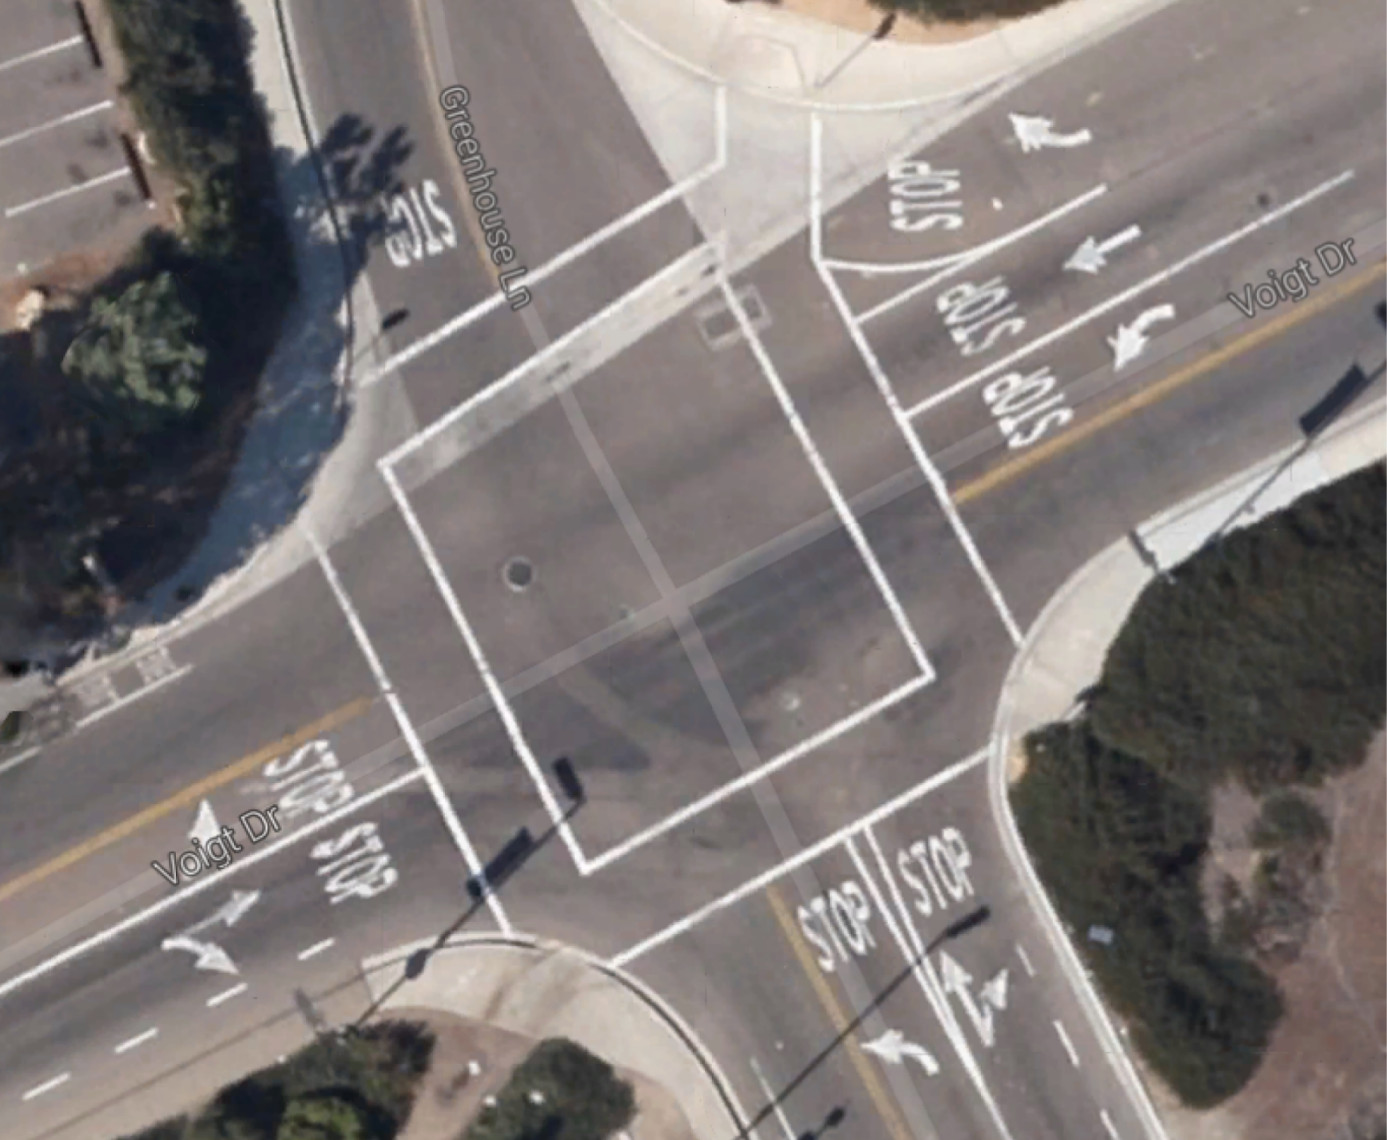 One of the intersections observed in the study was at Voight and Gilman in La Jolla, California. Lanes entering the intersection are marked with the word *STOP*. The amount of traffic that drivers dealt with was quantified as the number of lanes that were already occupied by other vehicles as drivers approached. For example, if there were vehicles waiting in two other lanes as a driver approached, then traffic was coded as two. Image courtesy of Google.